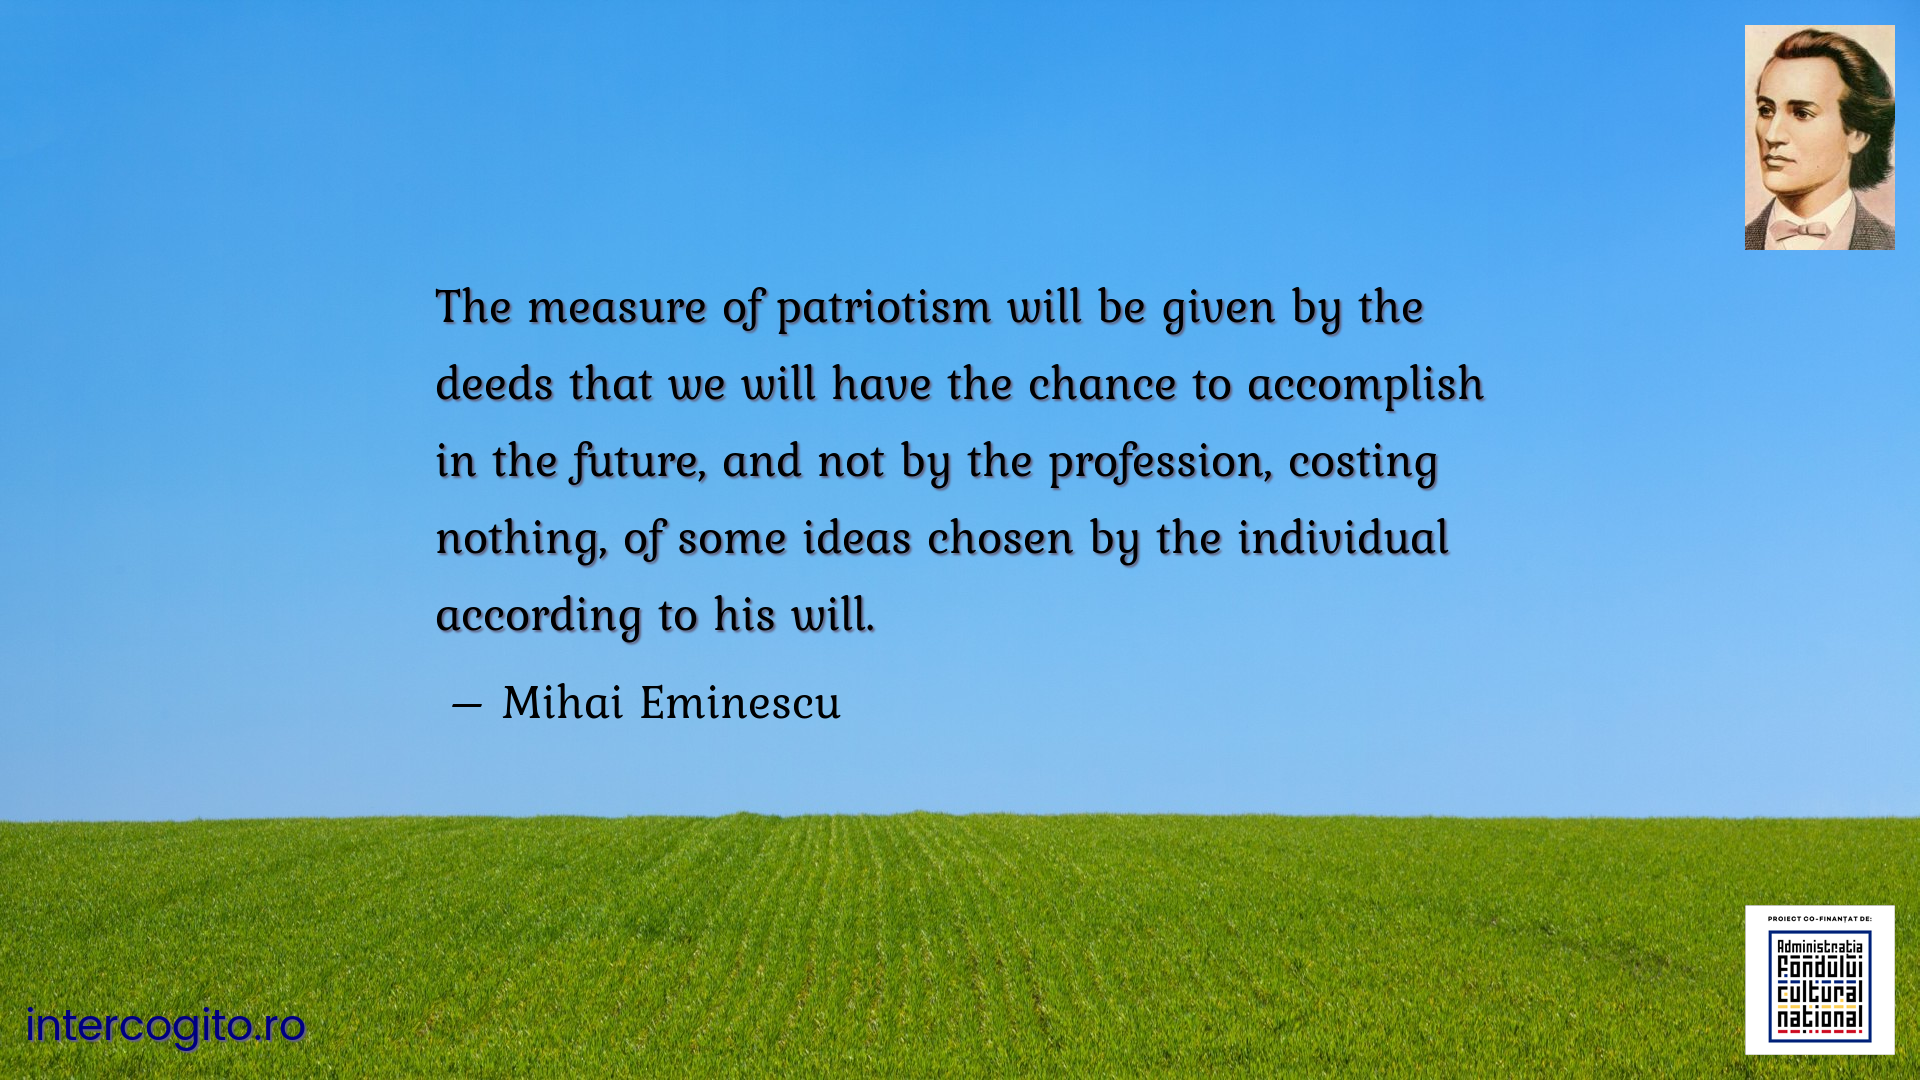 The measure of patriotism will be given by the deeds that we will have the chance to accomplish in the future, and not by the profession, costing nothing, of some ideas chosen by the individual according to his will.